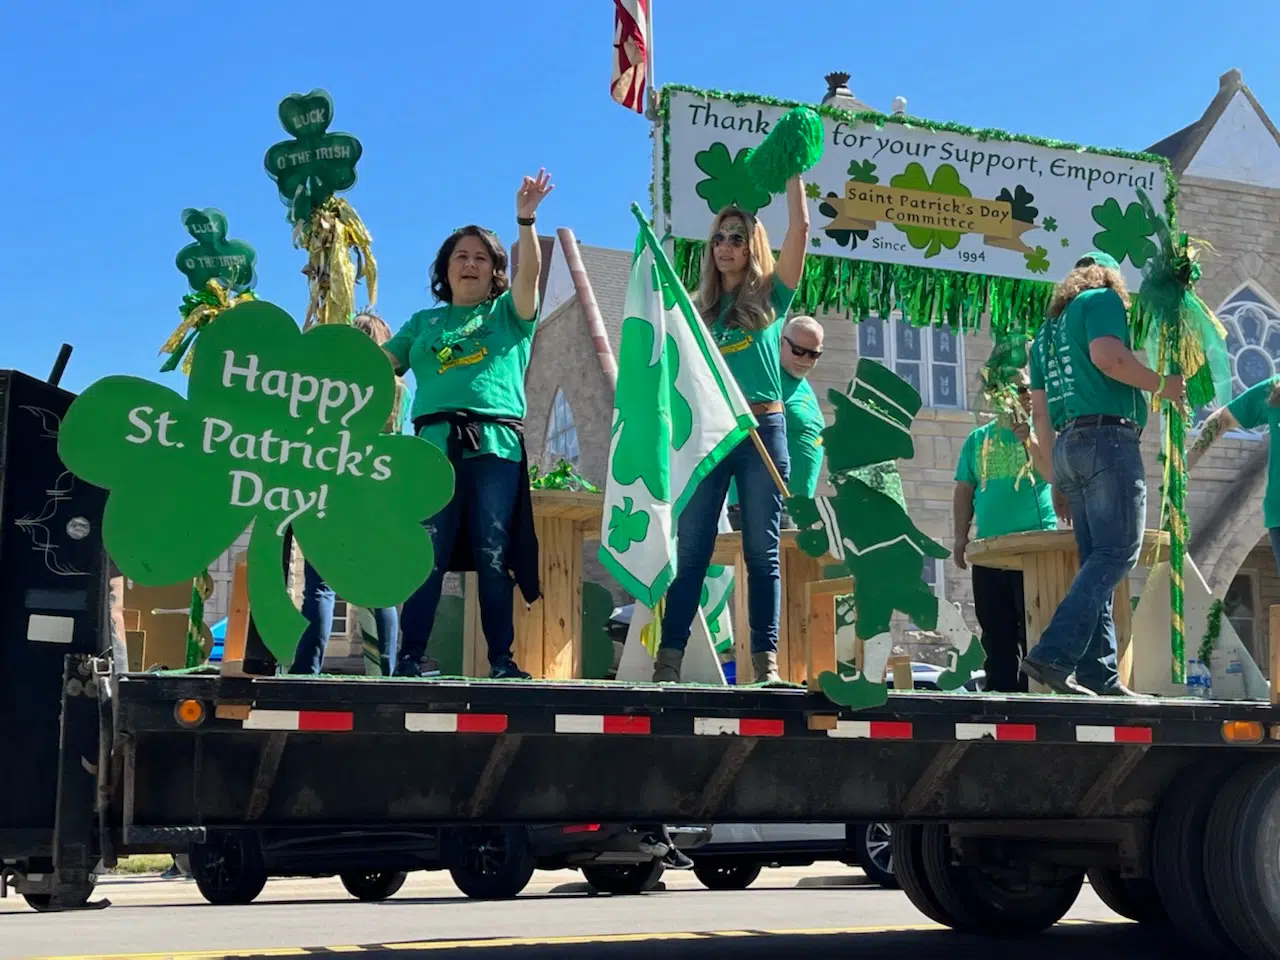 St. Patrick's Committee culminates fundraising with glorious Saturday for parade, arts activity, beer garden